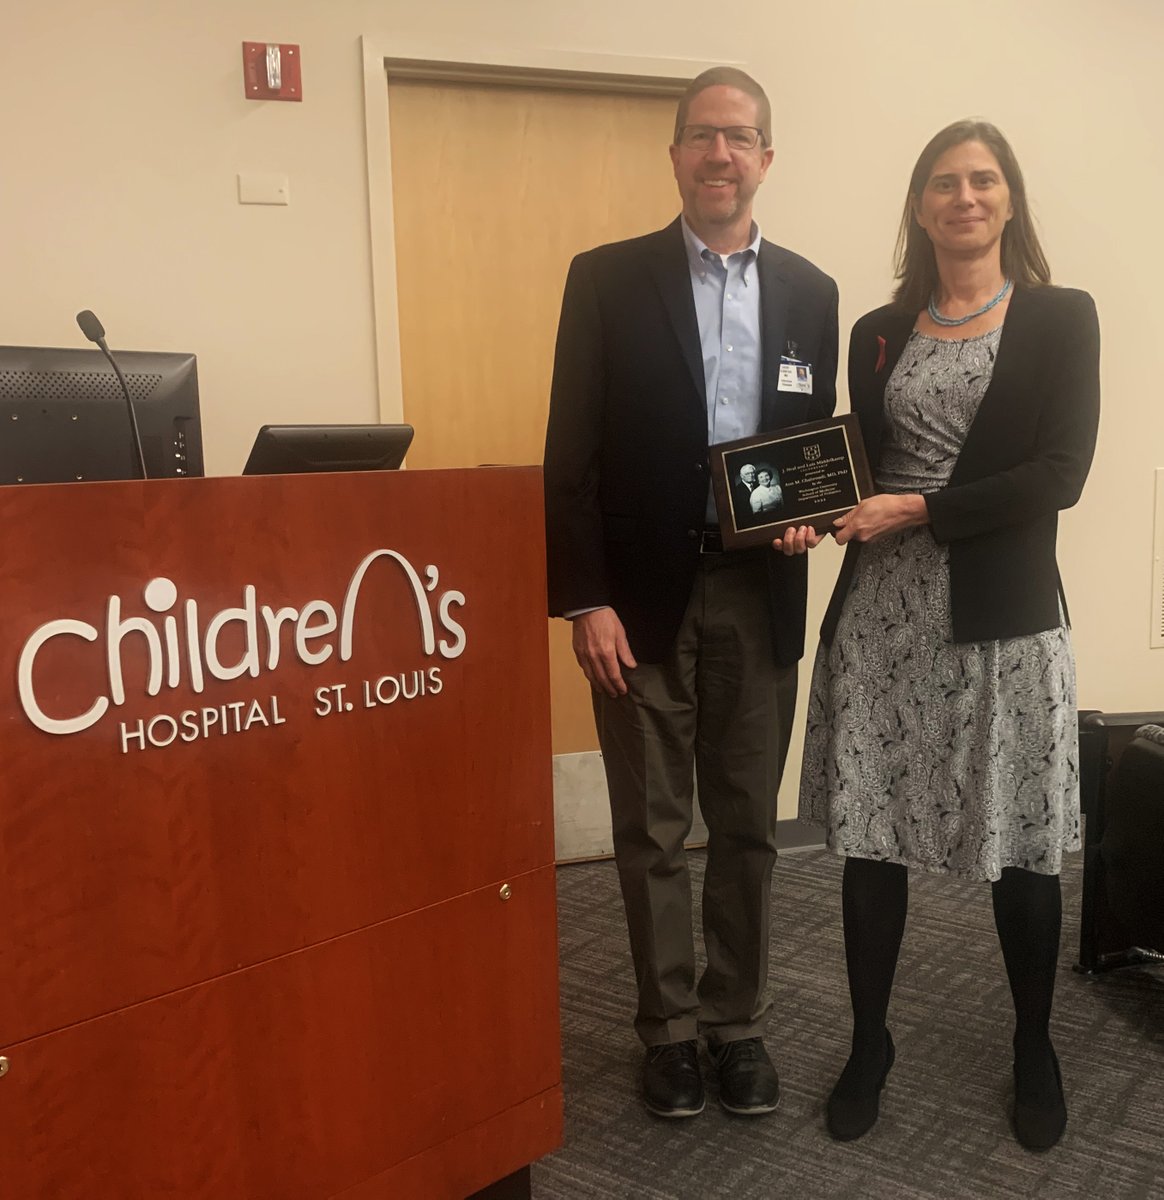 We were excited to welcome @AnnChahroudi to deliver the annual Middelkamp Lecture in Peds ID at @WUSTLPeds last week! Her HIV studies are impressive, and our fellows and faculty loved talking with her. Thanks Ann!